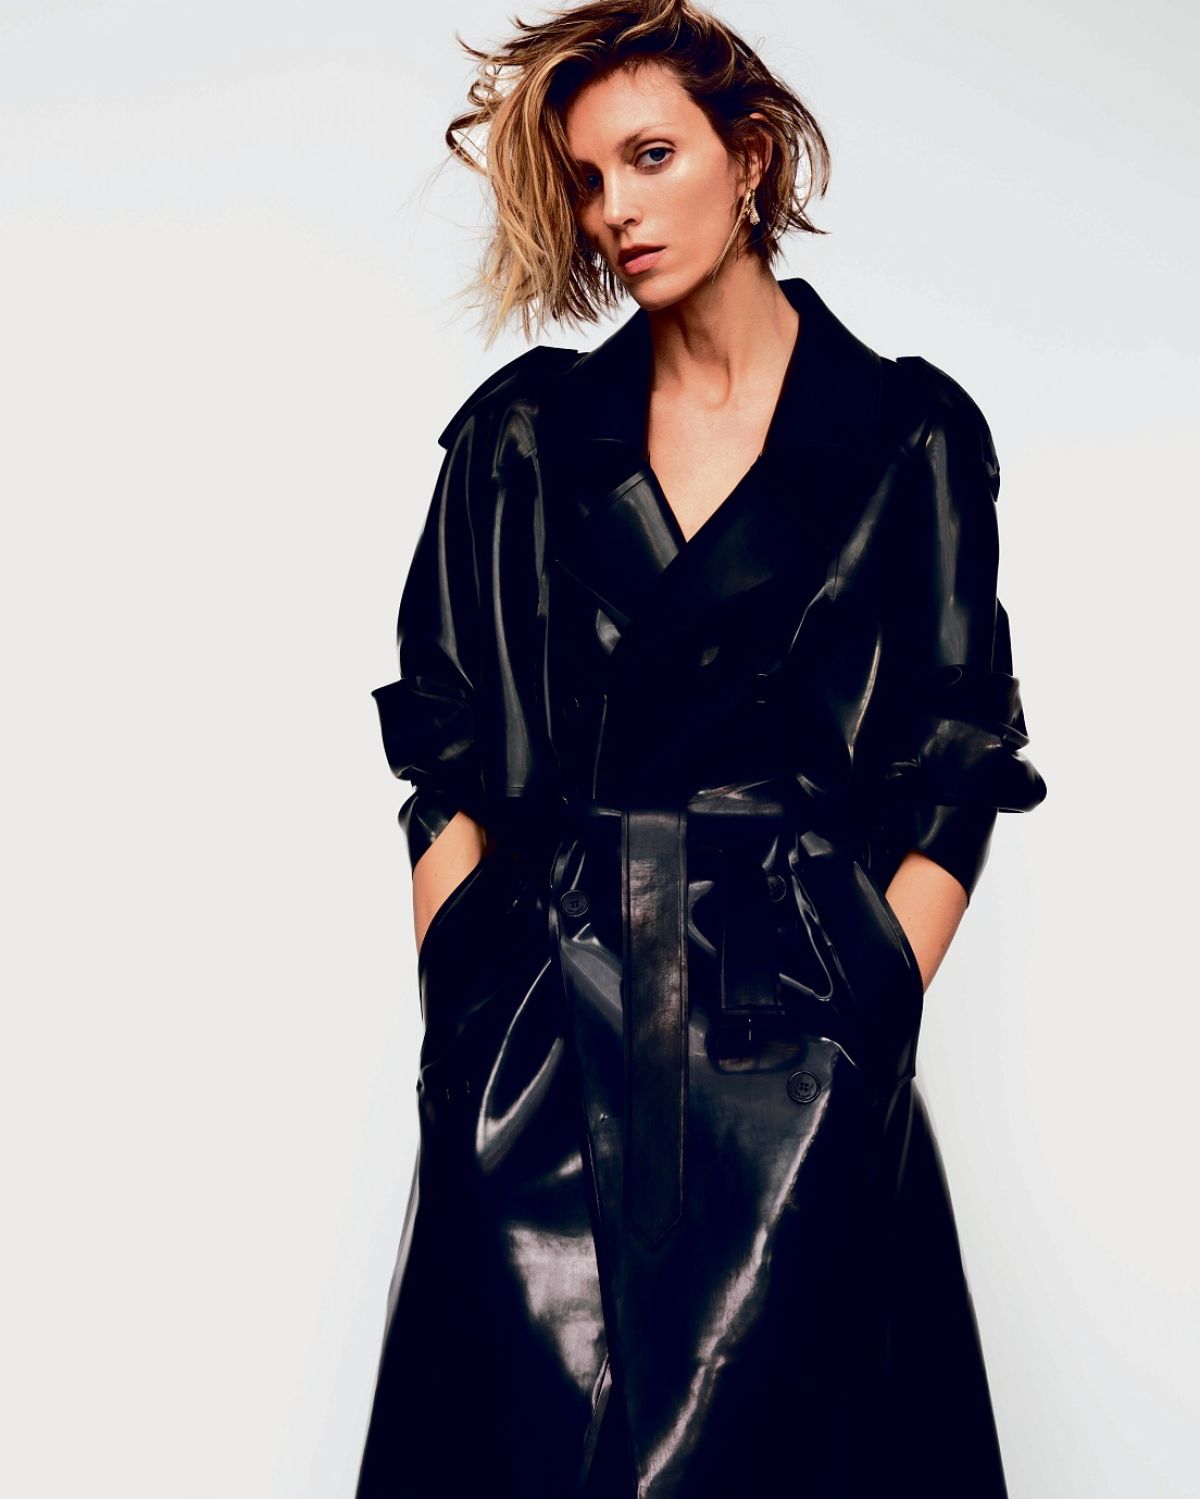 ANJA RUBIK for Financial Times How to Spend It, December 2021 – HawtCelebs